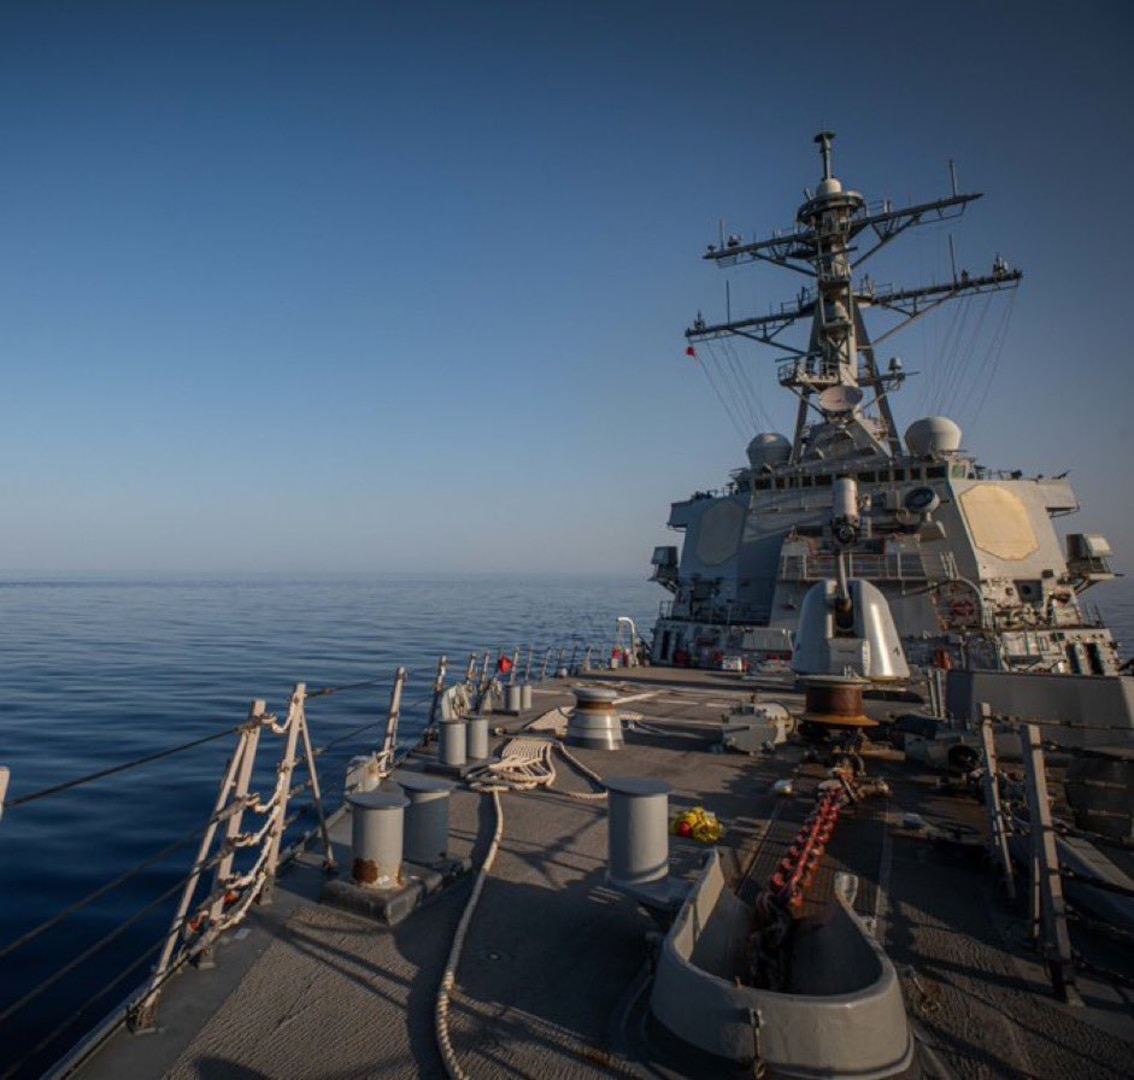 On March 5, between the hours of 3 p.m. and 5 p.m. (Sanaa time), U.S. Central Command (CENTCOM) forces shot down one anti-ship ballistic missile and three one-way attack unmanned aerial systems launched from Iranian-backed Houthi controlled areas of Yemen toward USS Carney (DDG 64) in the Red Sea. There are no injuries or damage to the ship.

Later between 8:45 p.m. and 9:40 p.m., CENTCOM forces destroyed three anti-ship missiles and three unmanned surface vessels(USV) in self-defense. 

The missiles and USVs were located in Houthi-controlled areas of Yemen.
CENTCOM forces identified the missiles, UAVs, and USVs and determined that they presented an imminent threat to merchant vessels and to the U.S. Navy ships in the region. These actions are taken to protect freedom of navigation and make international waters safer and more secure for U.S. Navy and merchant vessels.